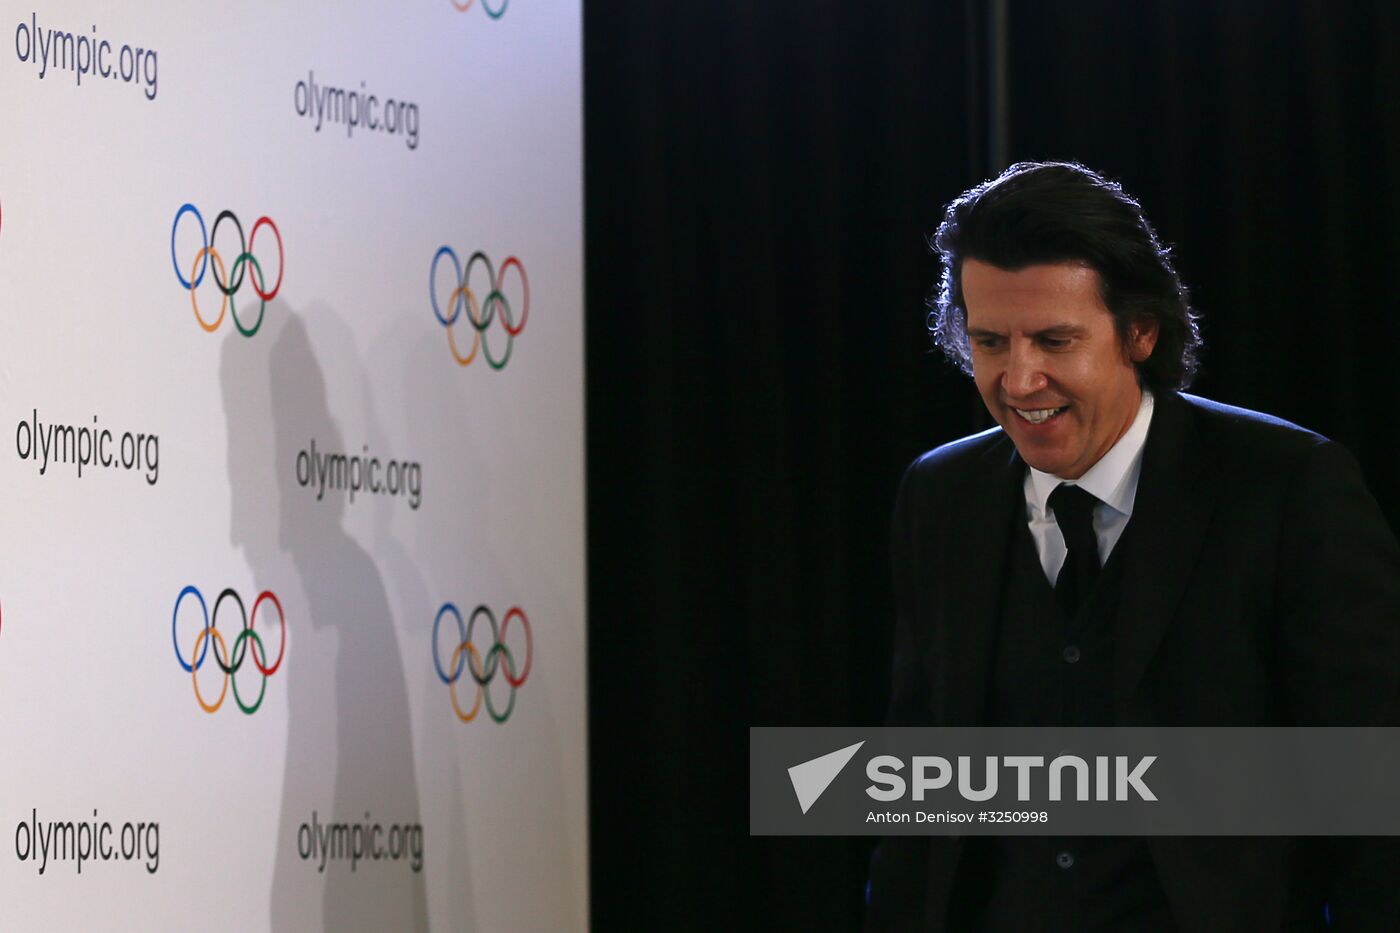 Meeting of Executive Board of International Olympic Committee